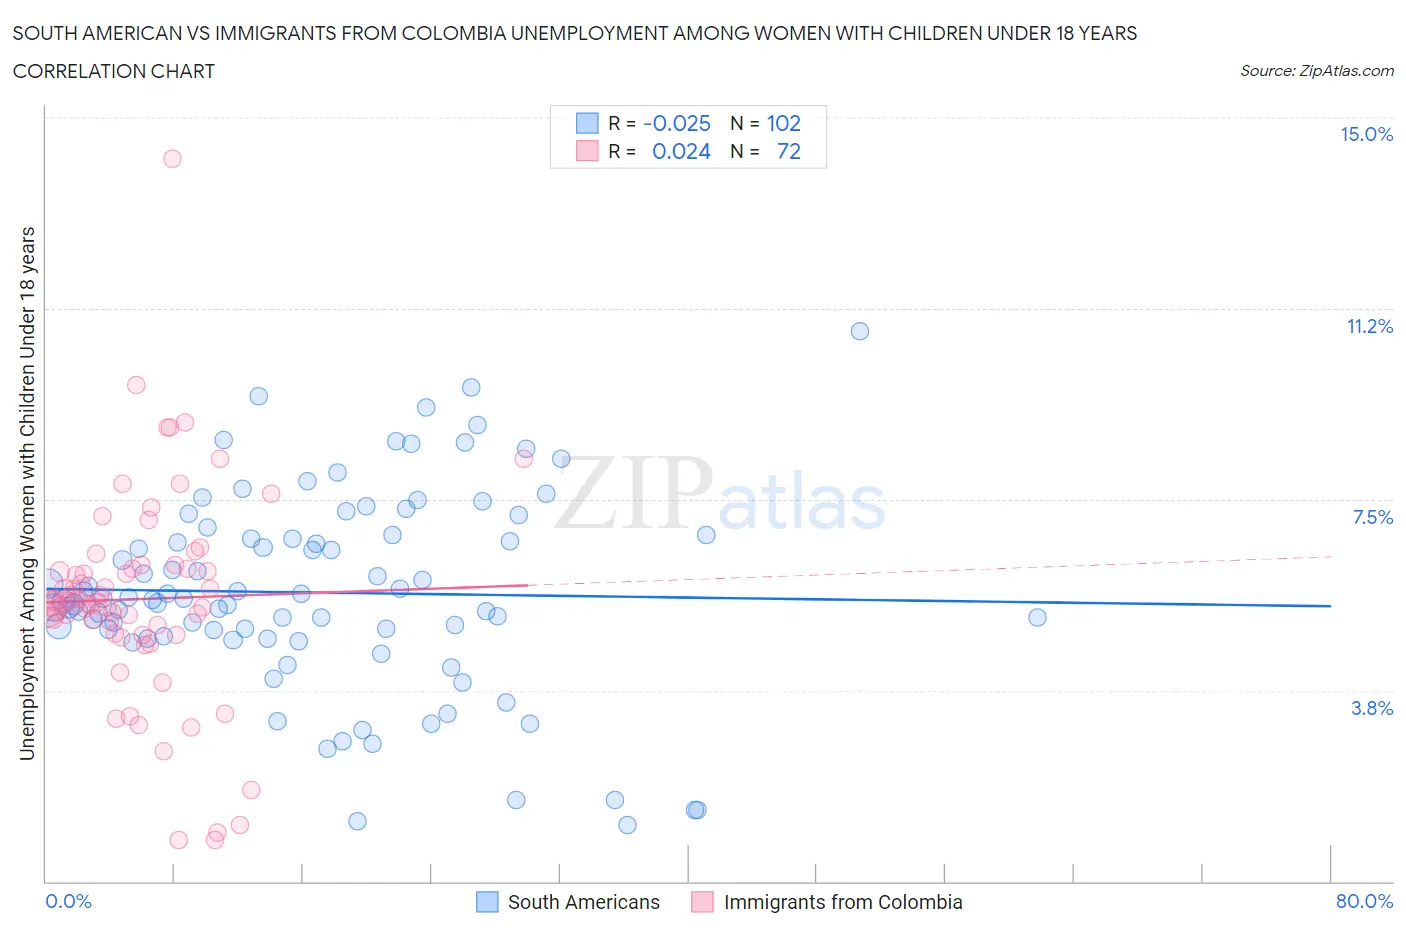 South American vs Immigrants from Colombia Unemployment Among Women with Children Under 18 years